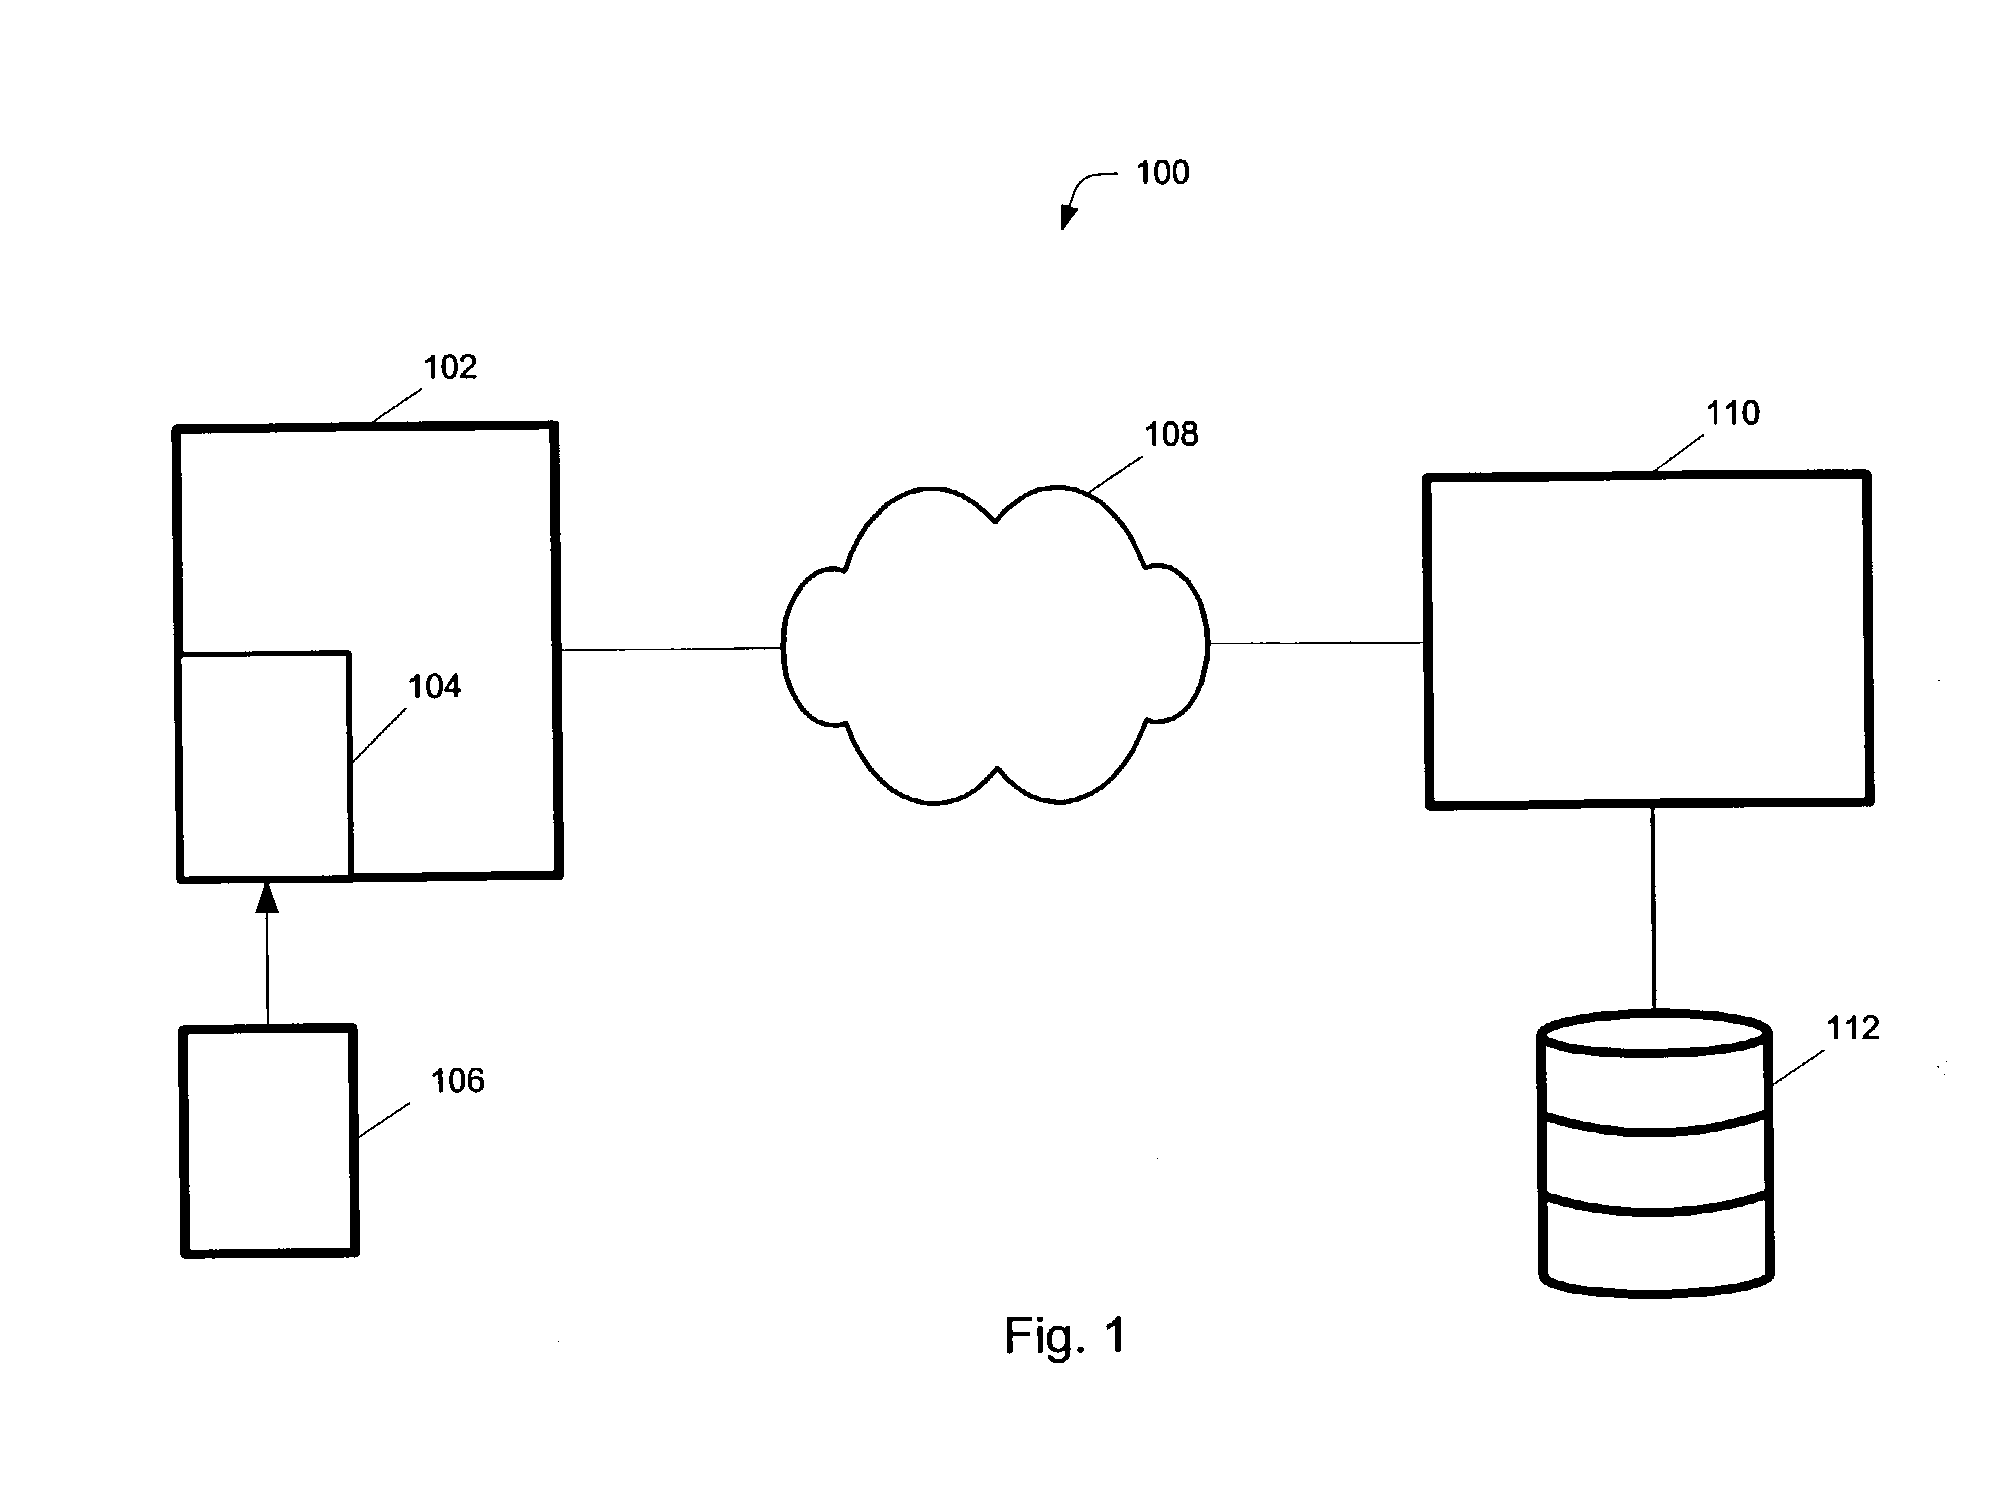 Systems and methods for secure authentication of electronic transactions